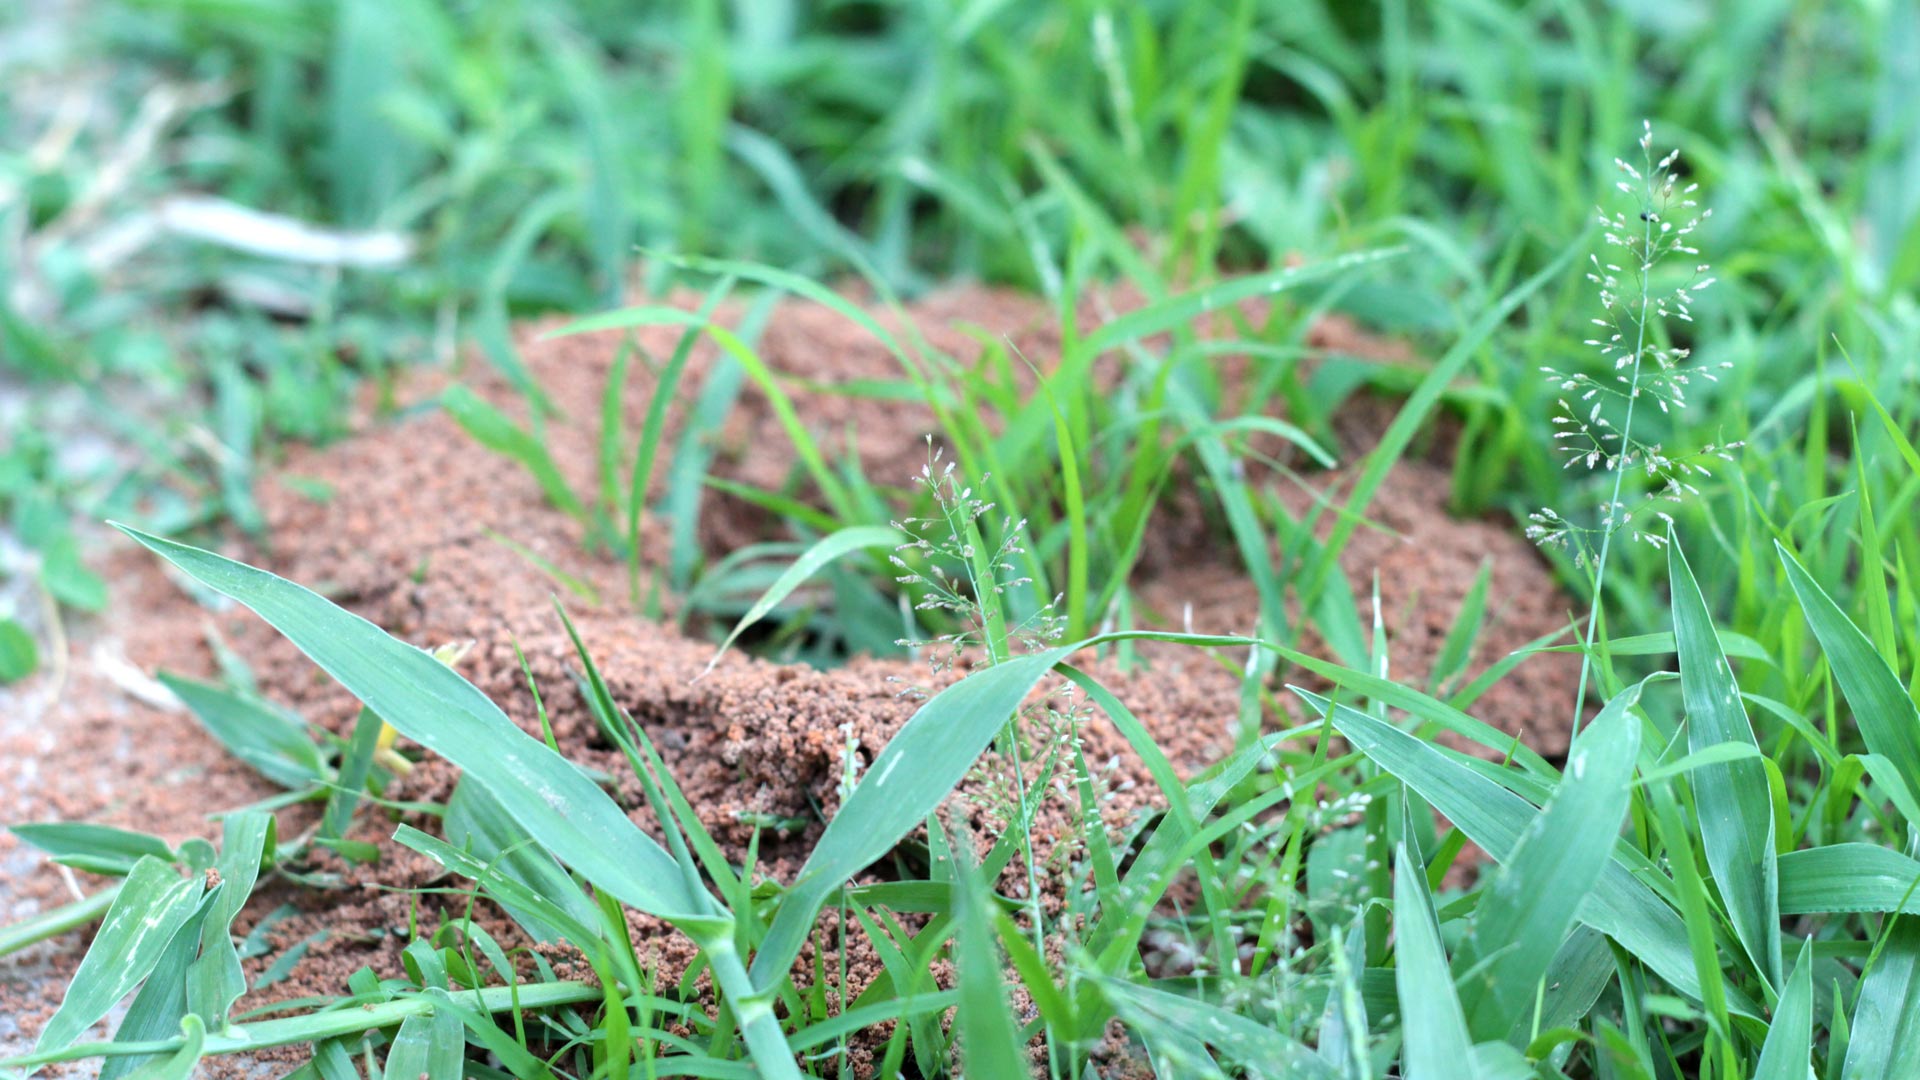 Fire ant hill found in a lawn in The Villages, FL.